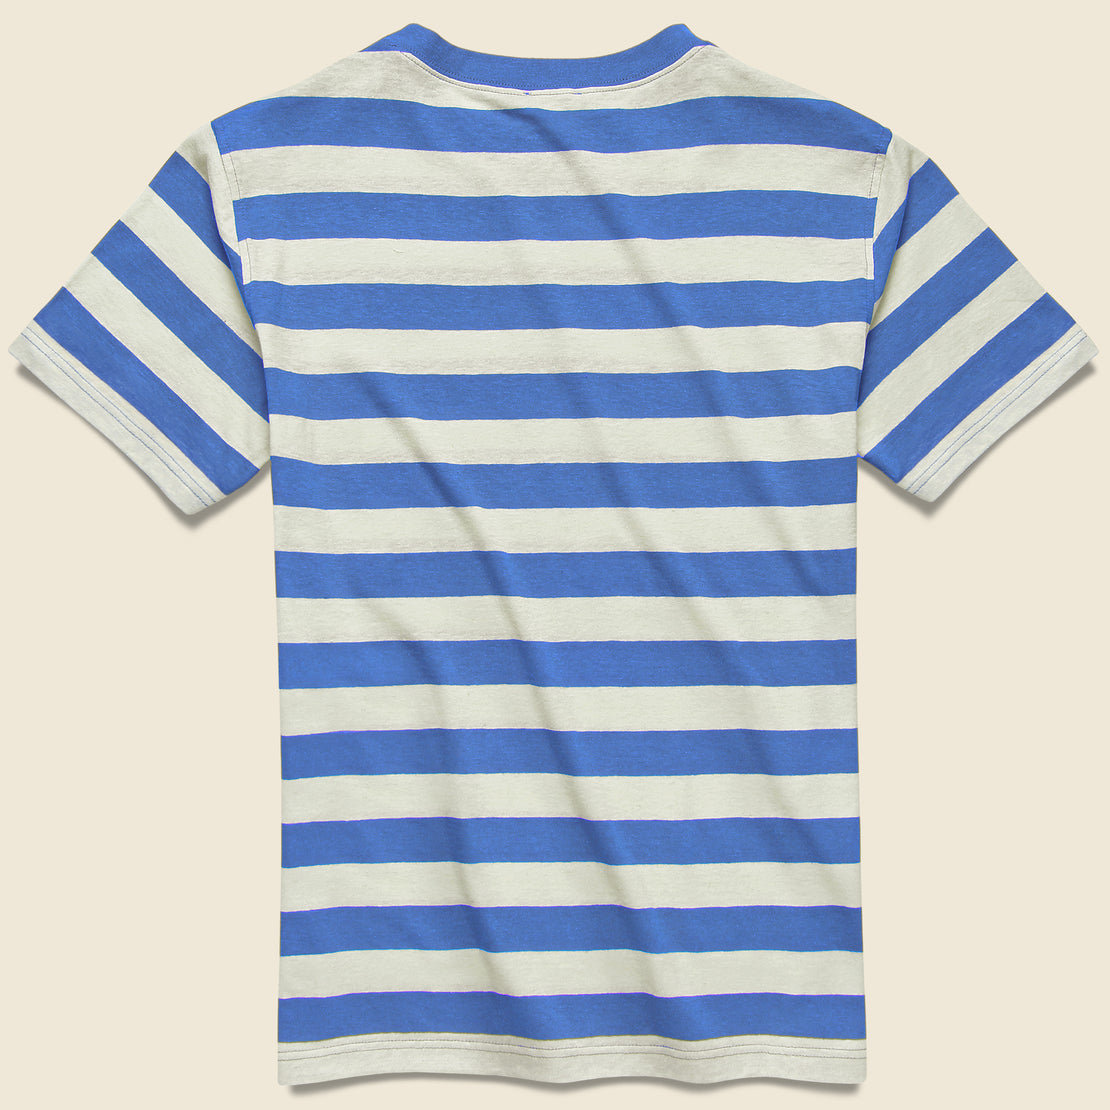 Breton Stripe Tee - Blue - Armor Lux - STAG Provisions - Tops - S/S Tee